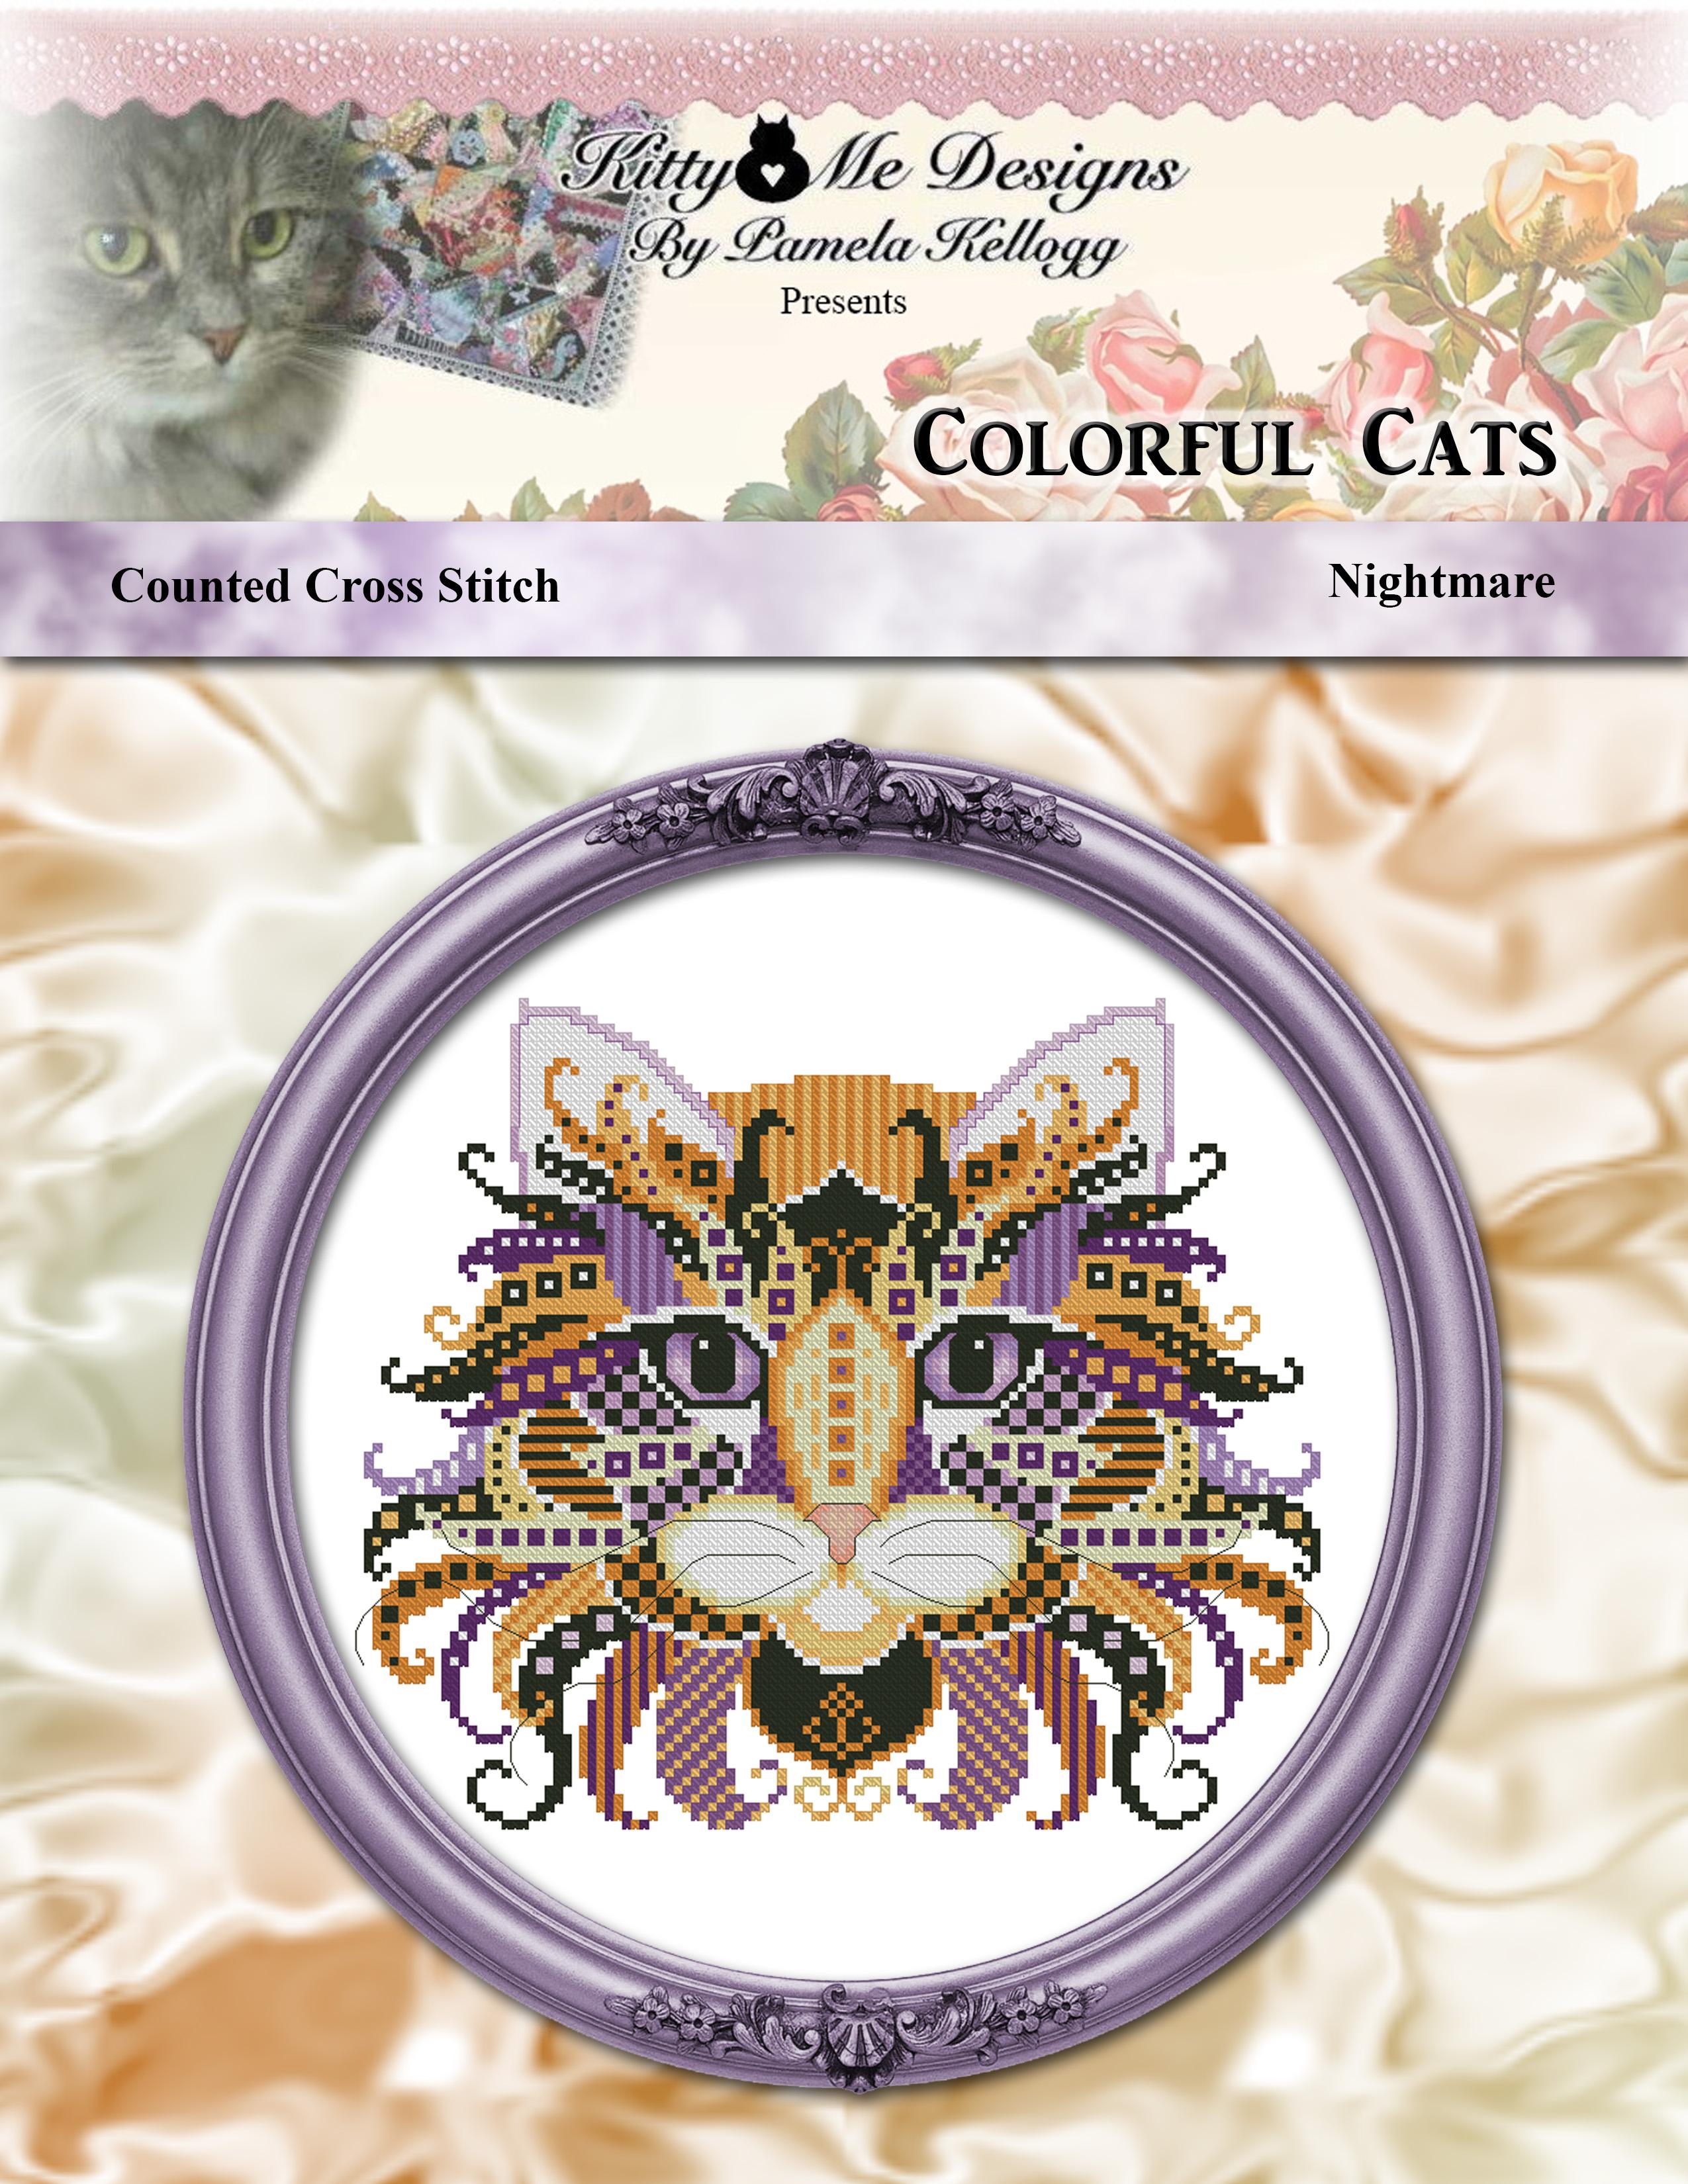 Colorful Cats: Nightmare by Kitty and Me Designs